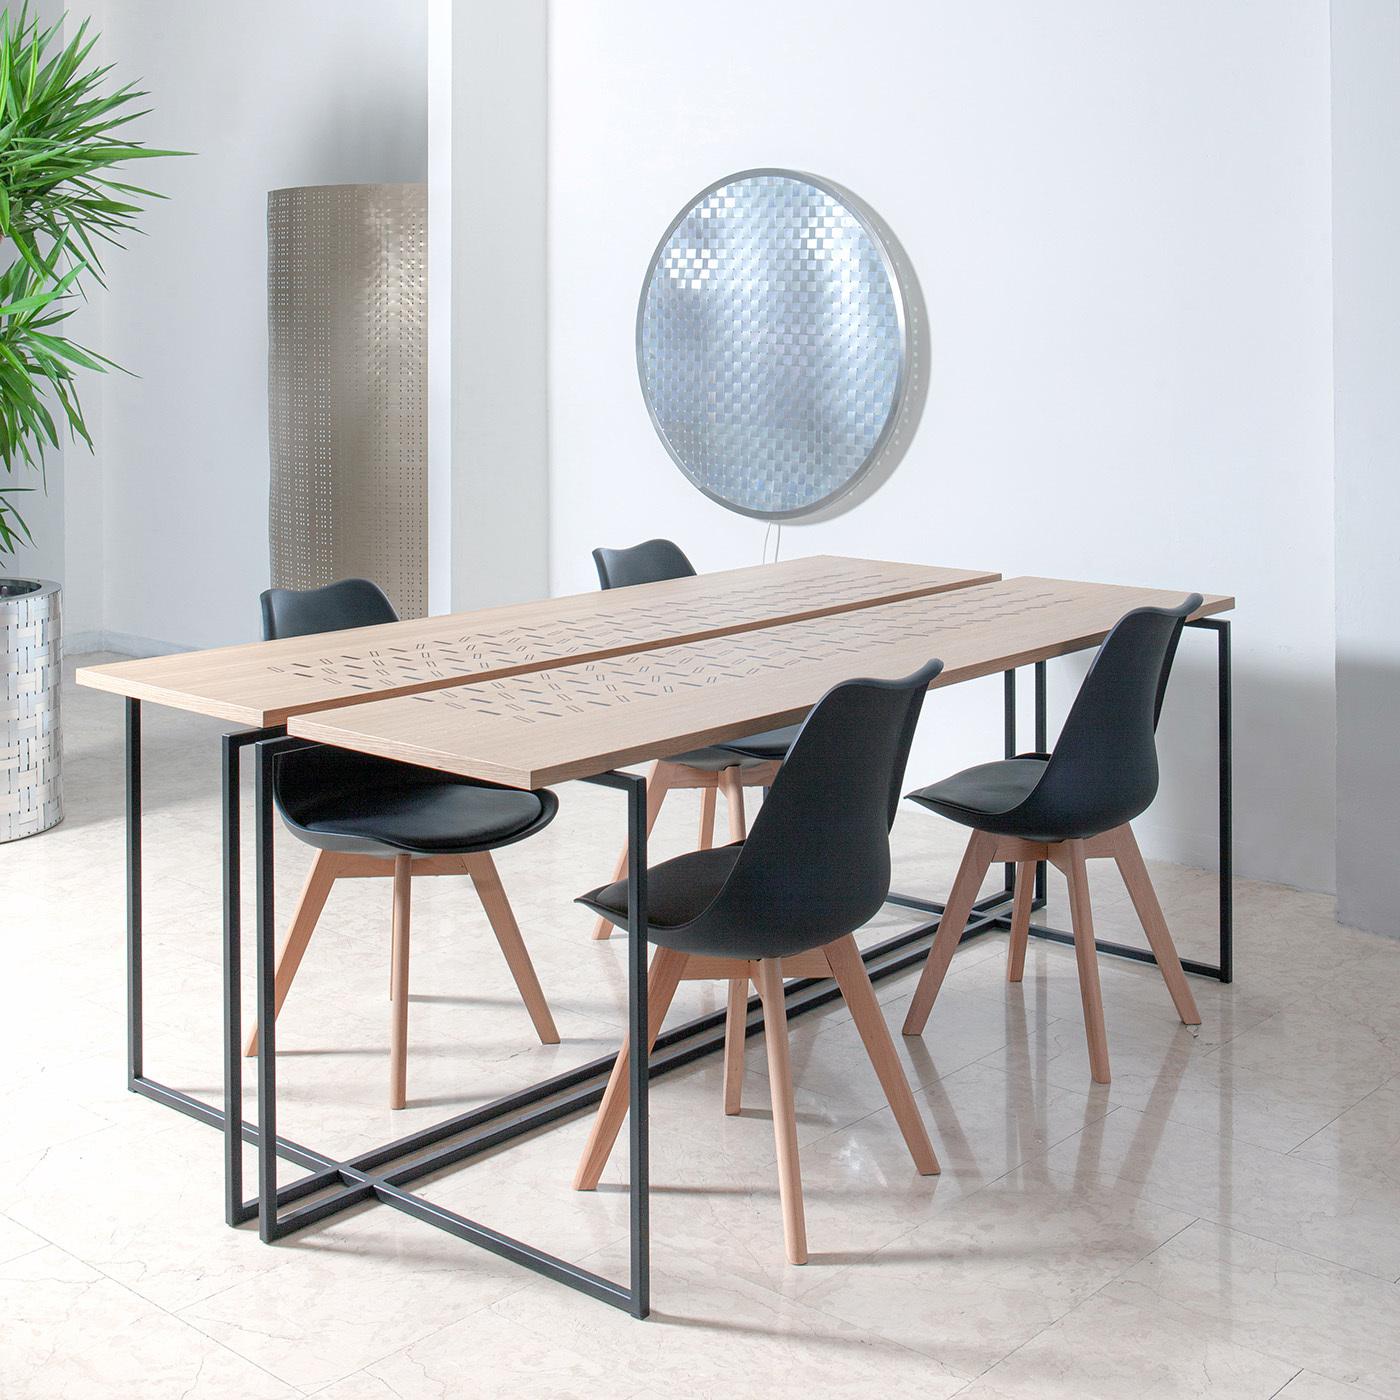 Stige Oak Table by Manrico Freda In New Condition For Sale In Milan, IT